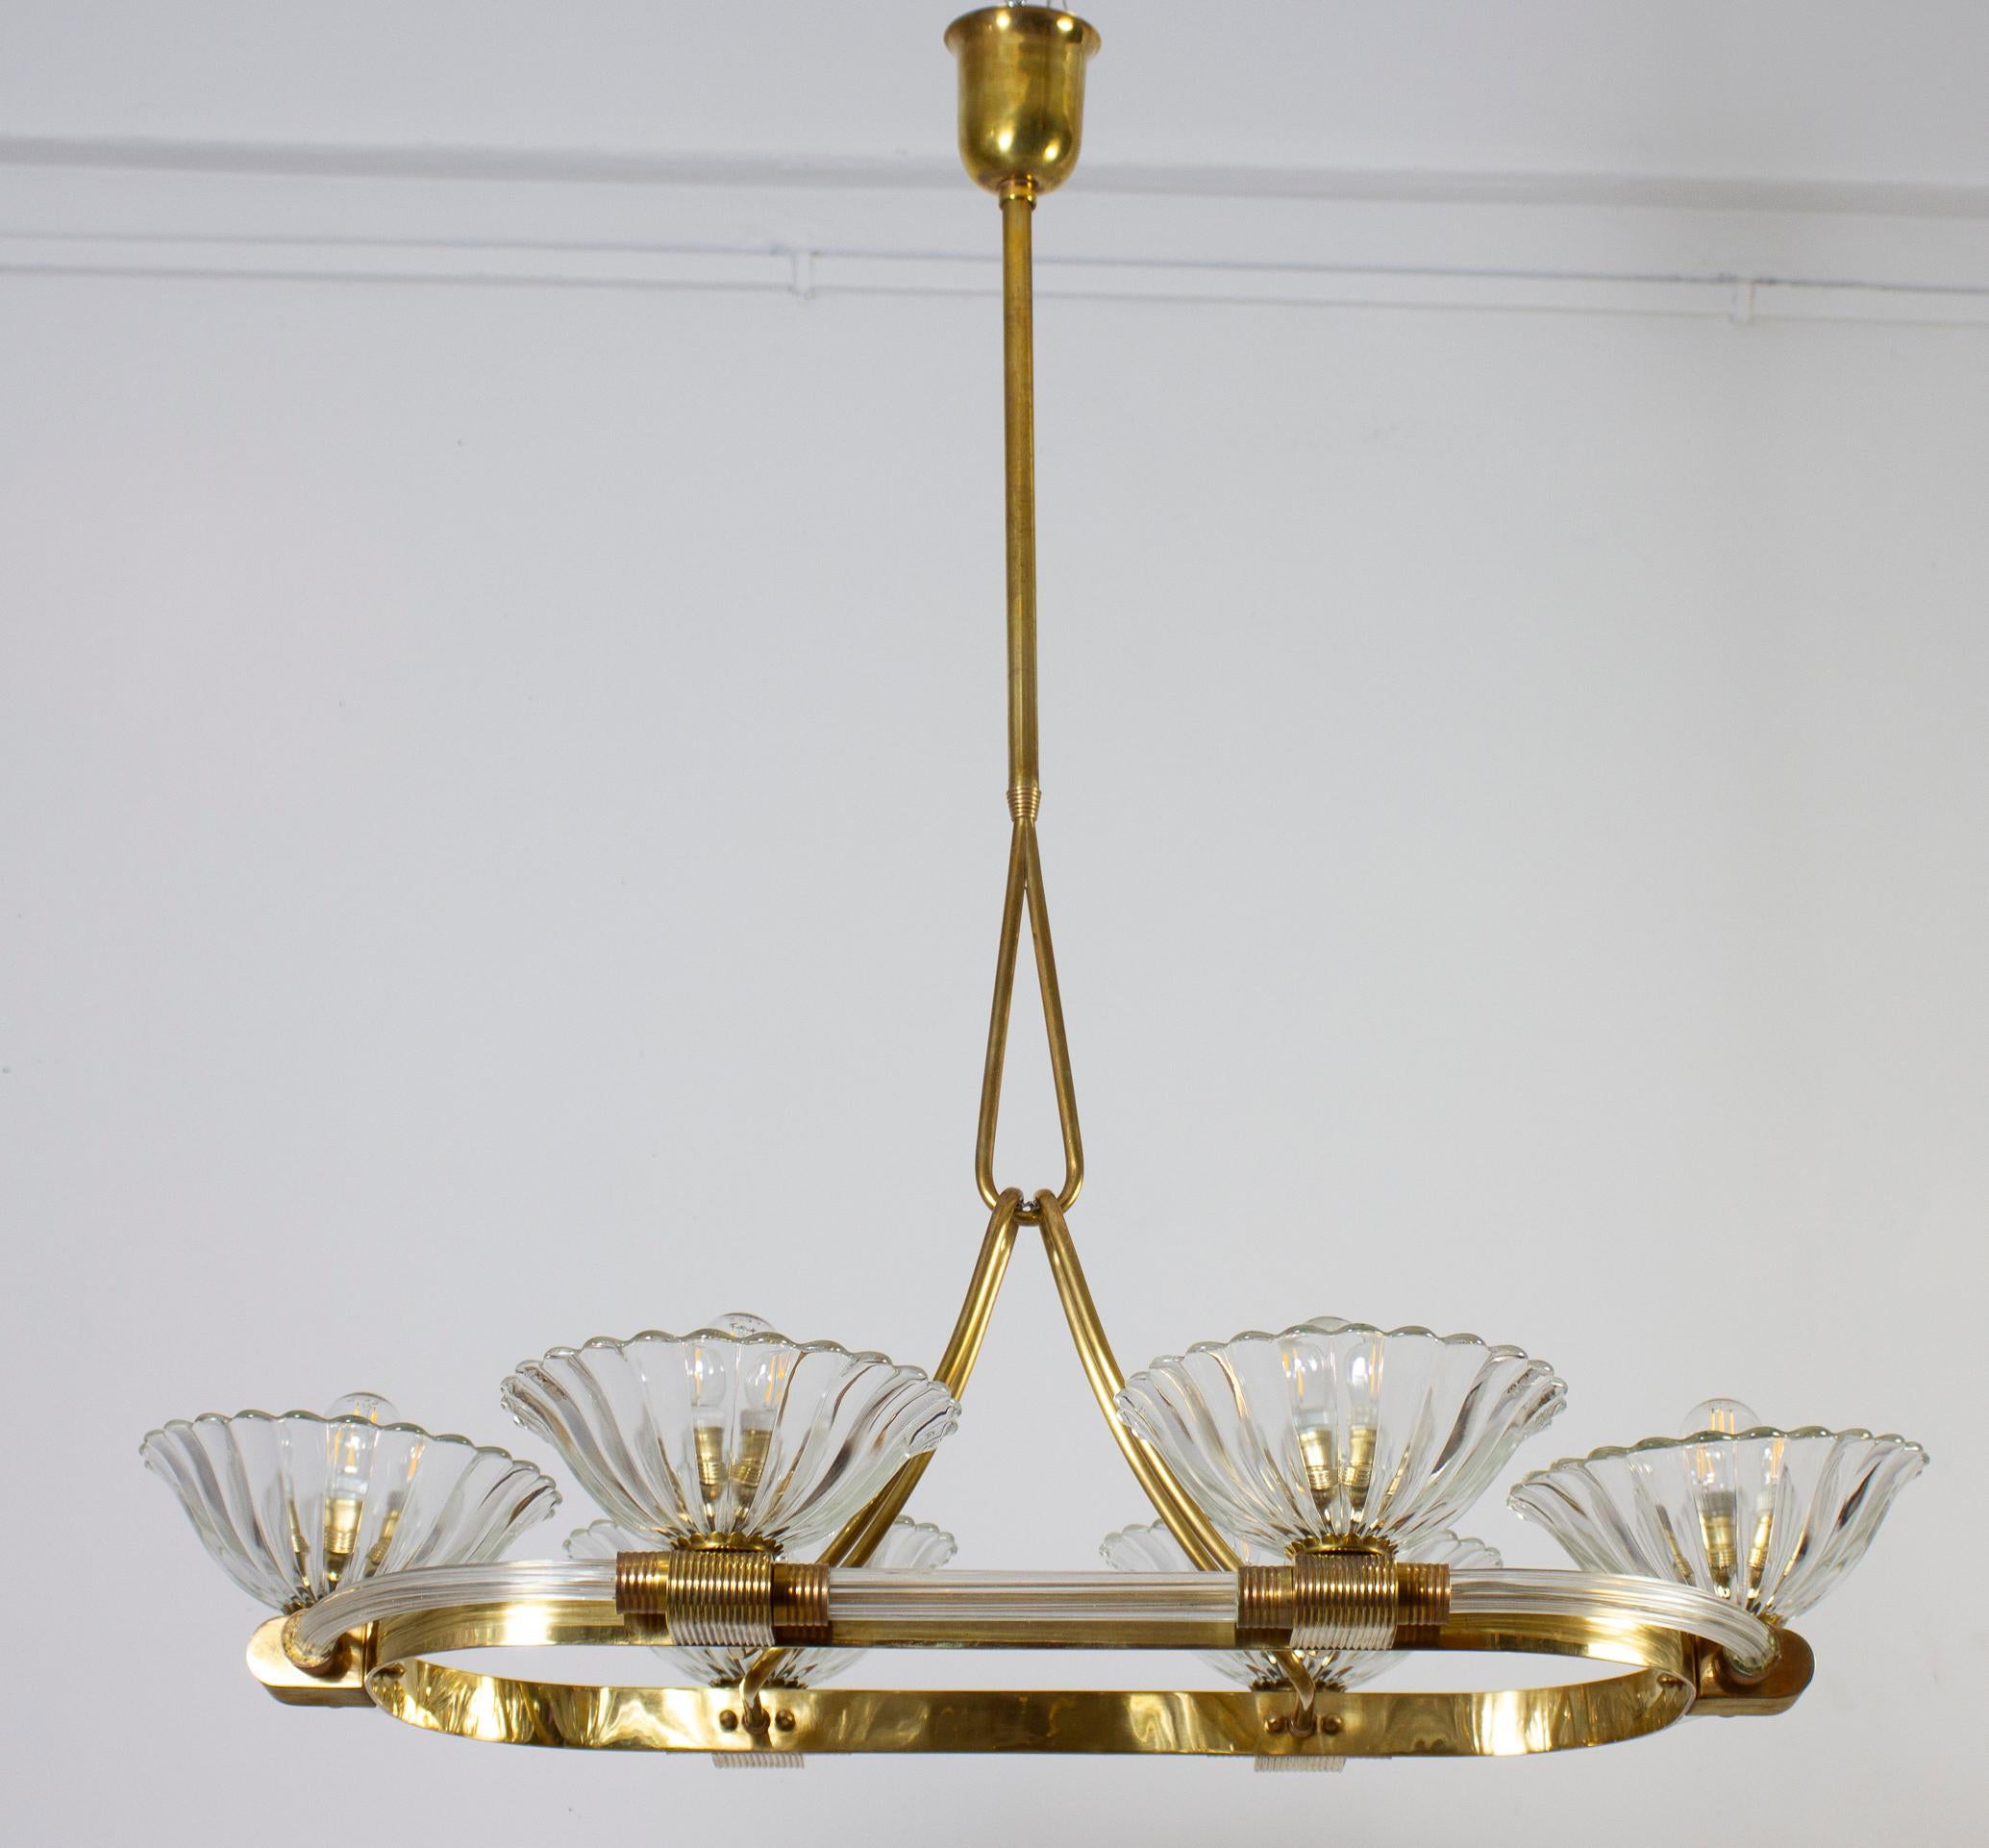 20th Century  Art Deco Oval Shape Brass and Murano Glass Chandelier by Ercole Barovier 1940 For Sale